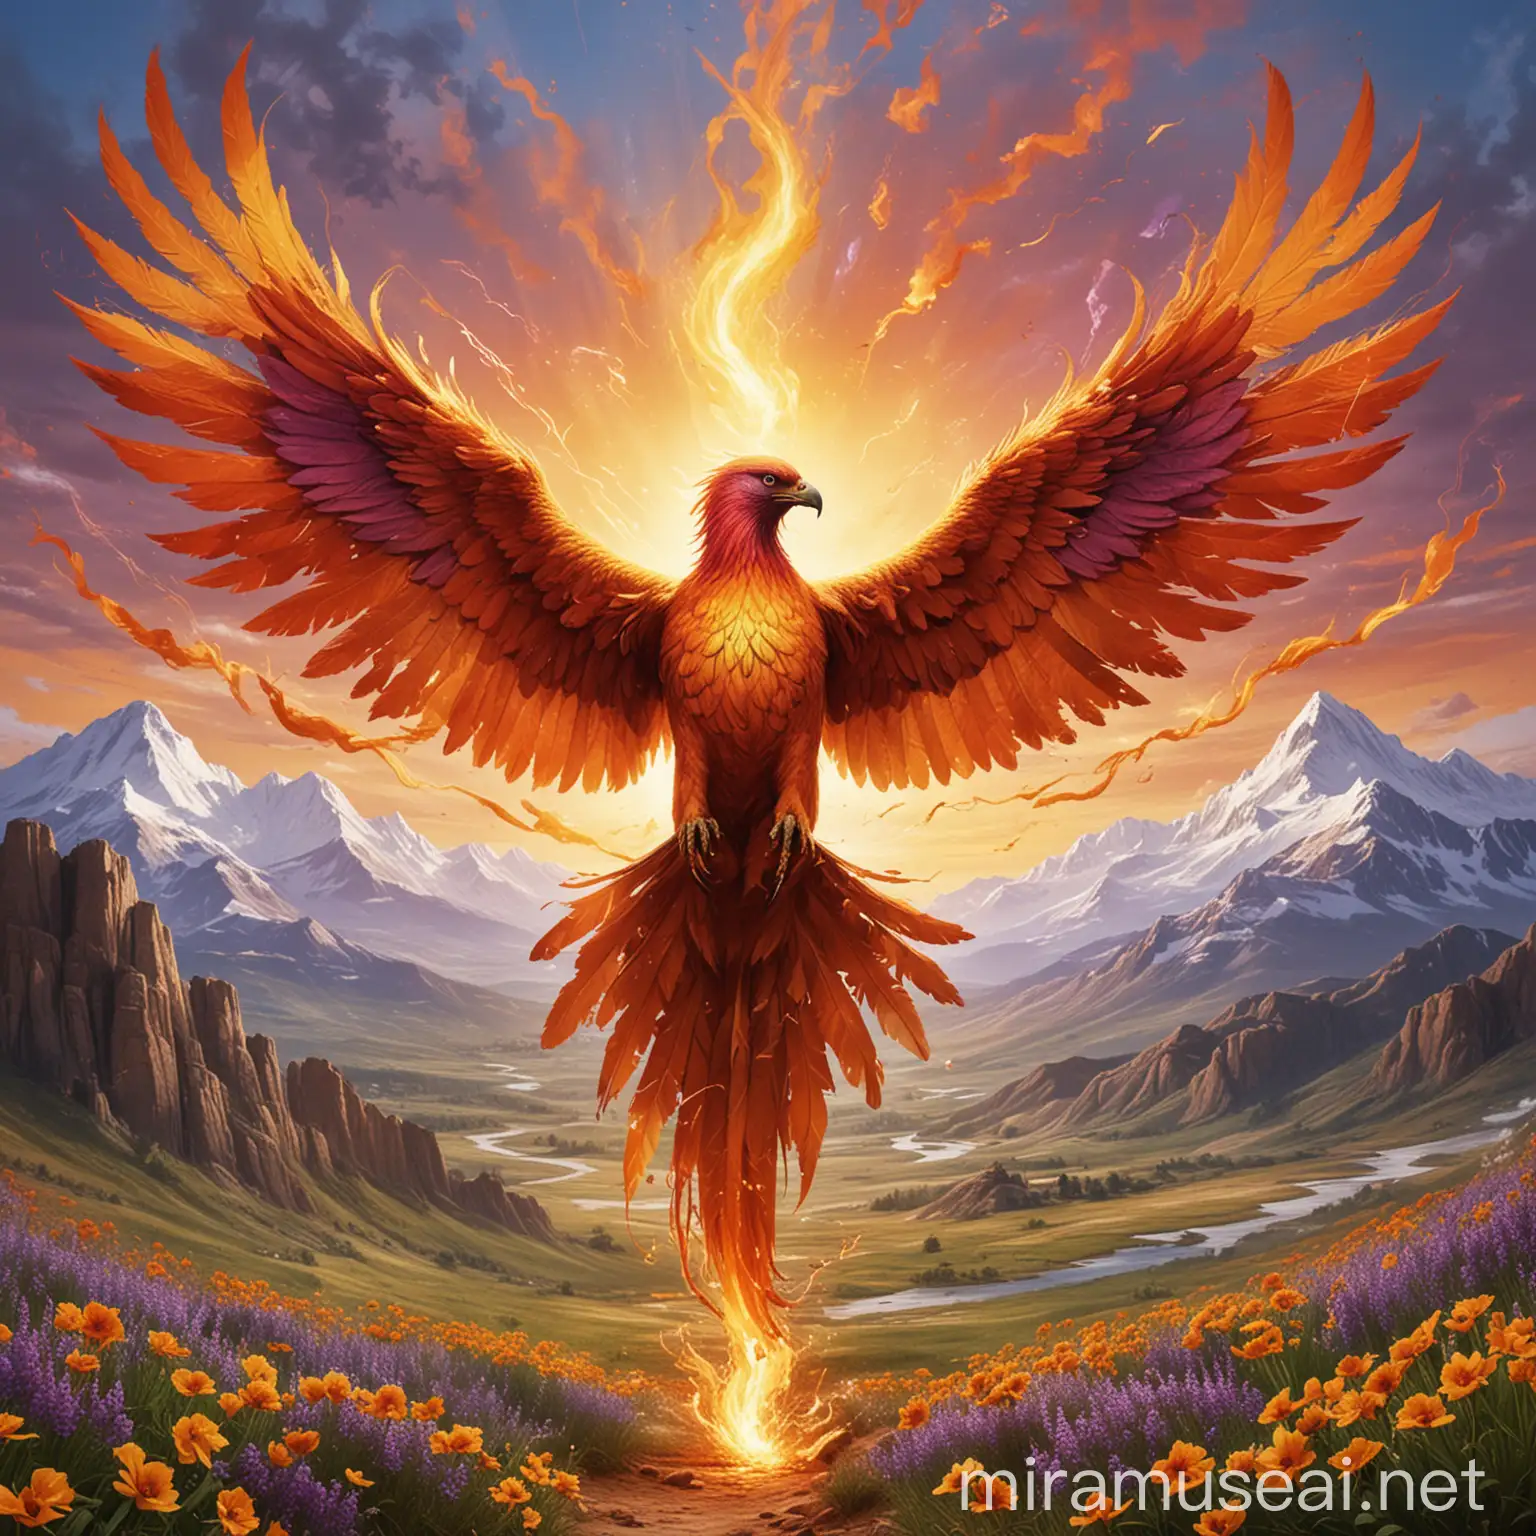 1. Create an image of a phoenix breaking free from chains, symbolizing freedom and recovery from addiction. 
2. Set the background with an open, bright blue sky (#3498DB) and distant mountains to symbolize overcoming challenges.
3. The ground should be covered with green grass (#2ECC71) and colorful flowers: yellow (#F4D03F), orange (#F39C12), red (#E74C3C), and purple (#9B59B6).
4. The phoenix should be depicted with outstretched wings, its feathers ablaze, symbolizing freedom and power.
   - Body colors: red (#E74C3C) and orange (#F39C12).
   - Wing colors: yellow (#F4D03F) and golden (#FFD700).
   - Eyes: green (#2ECC71).
5. Add broken chains at the base, symbolizing liberation from addiction: black (#000000) and silver (#BDC3C7).
6. Flames of hope should emanate from the phoenix’s heart: yellow (#F4D03F) and bright orange (#F39C12).
7. Include inspirational text alongside or within the image, such as "Freedom comes from within" and "The power to quit is divine," using golden (#FFD700) and white (#FFFFFF).
8. Ensure the overall style incorporates elements of Leonardo da Vinci, digital painting, and digital collage art for a captivating and unique effect.
